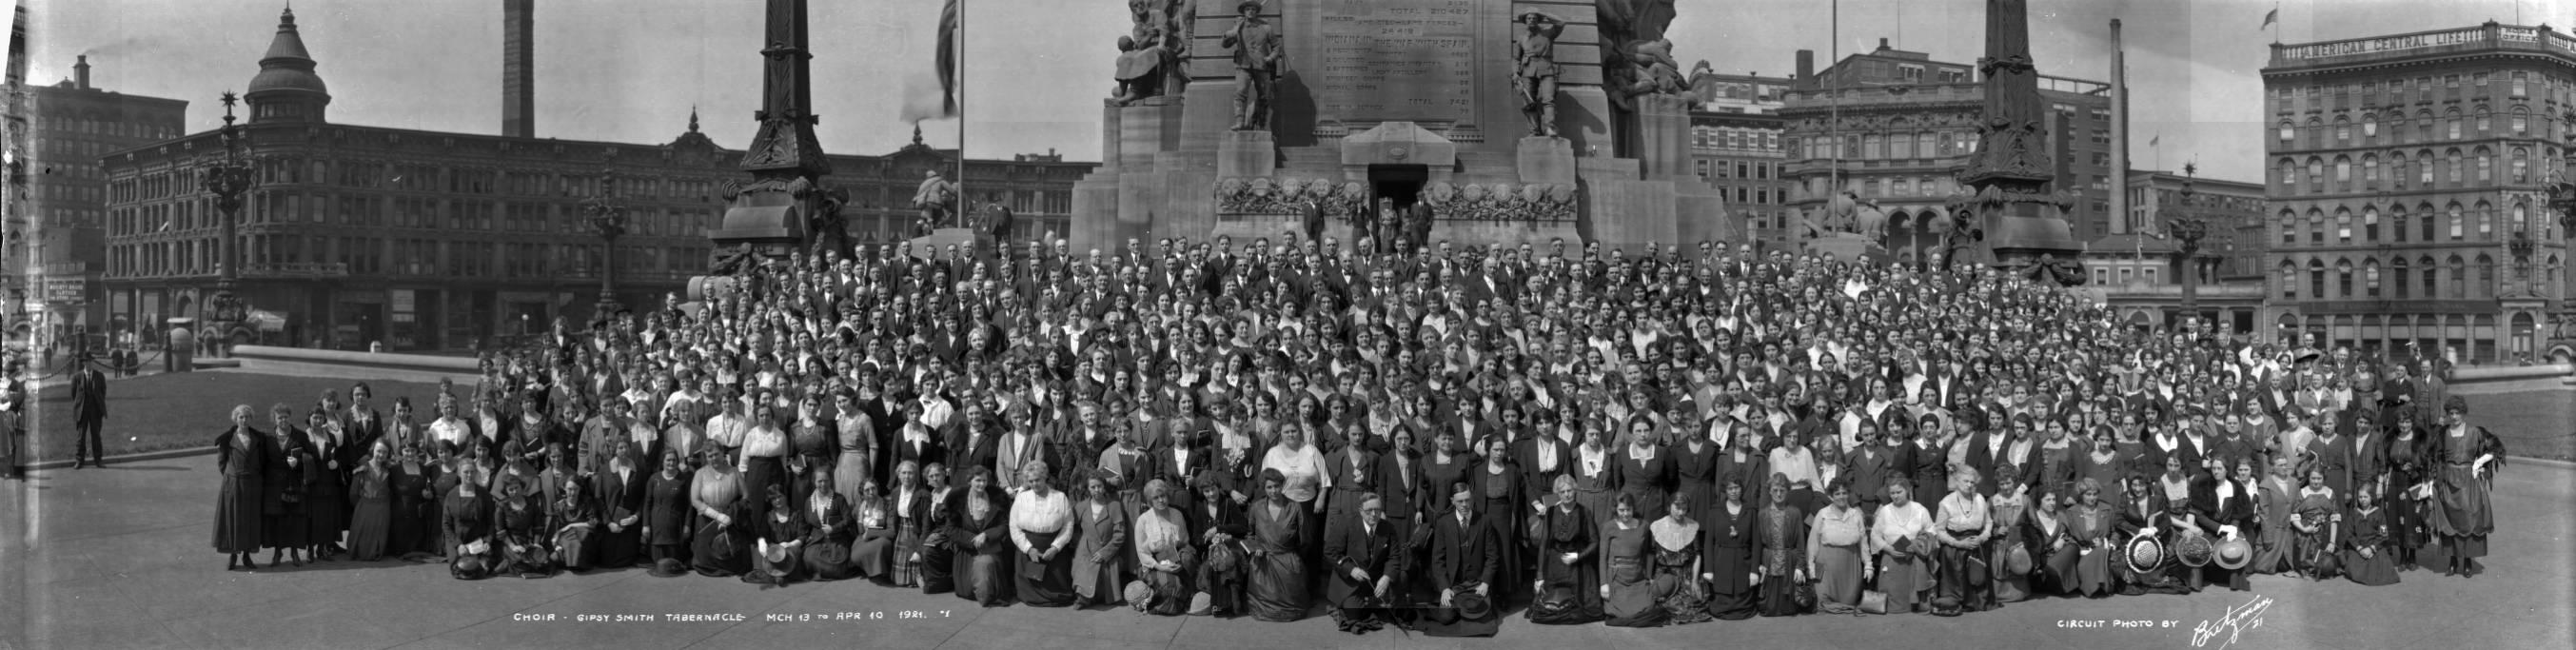 A large group of people gather together for a photograph.